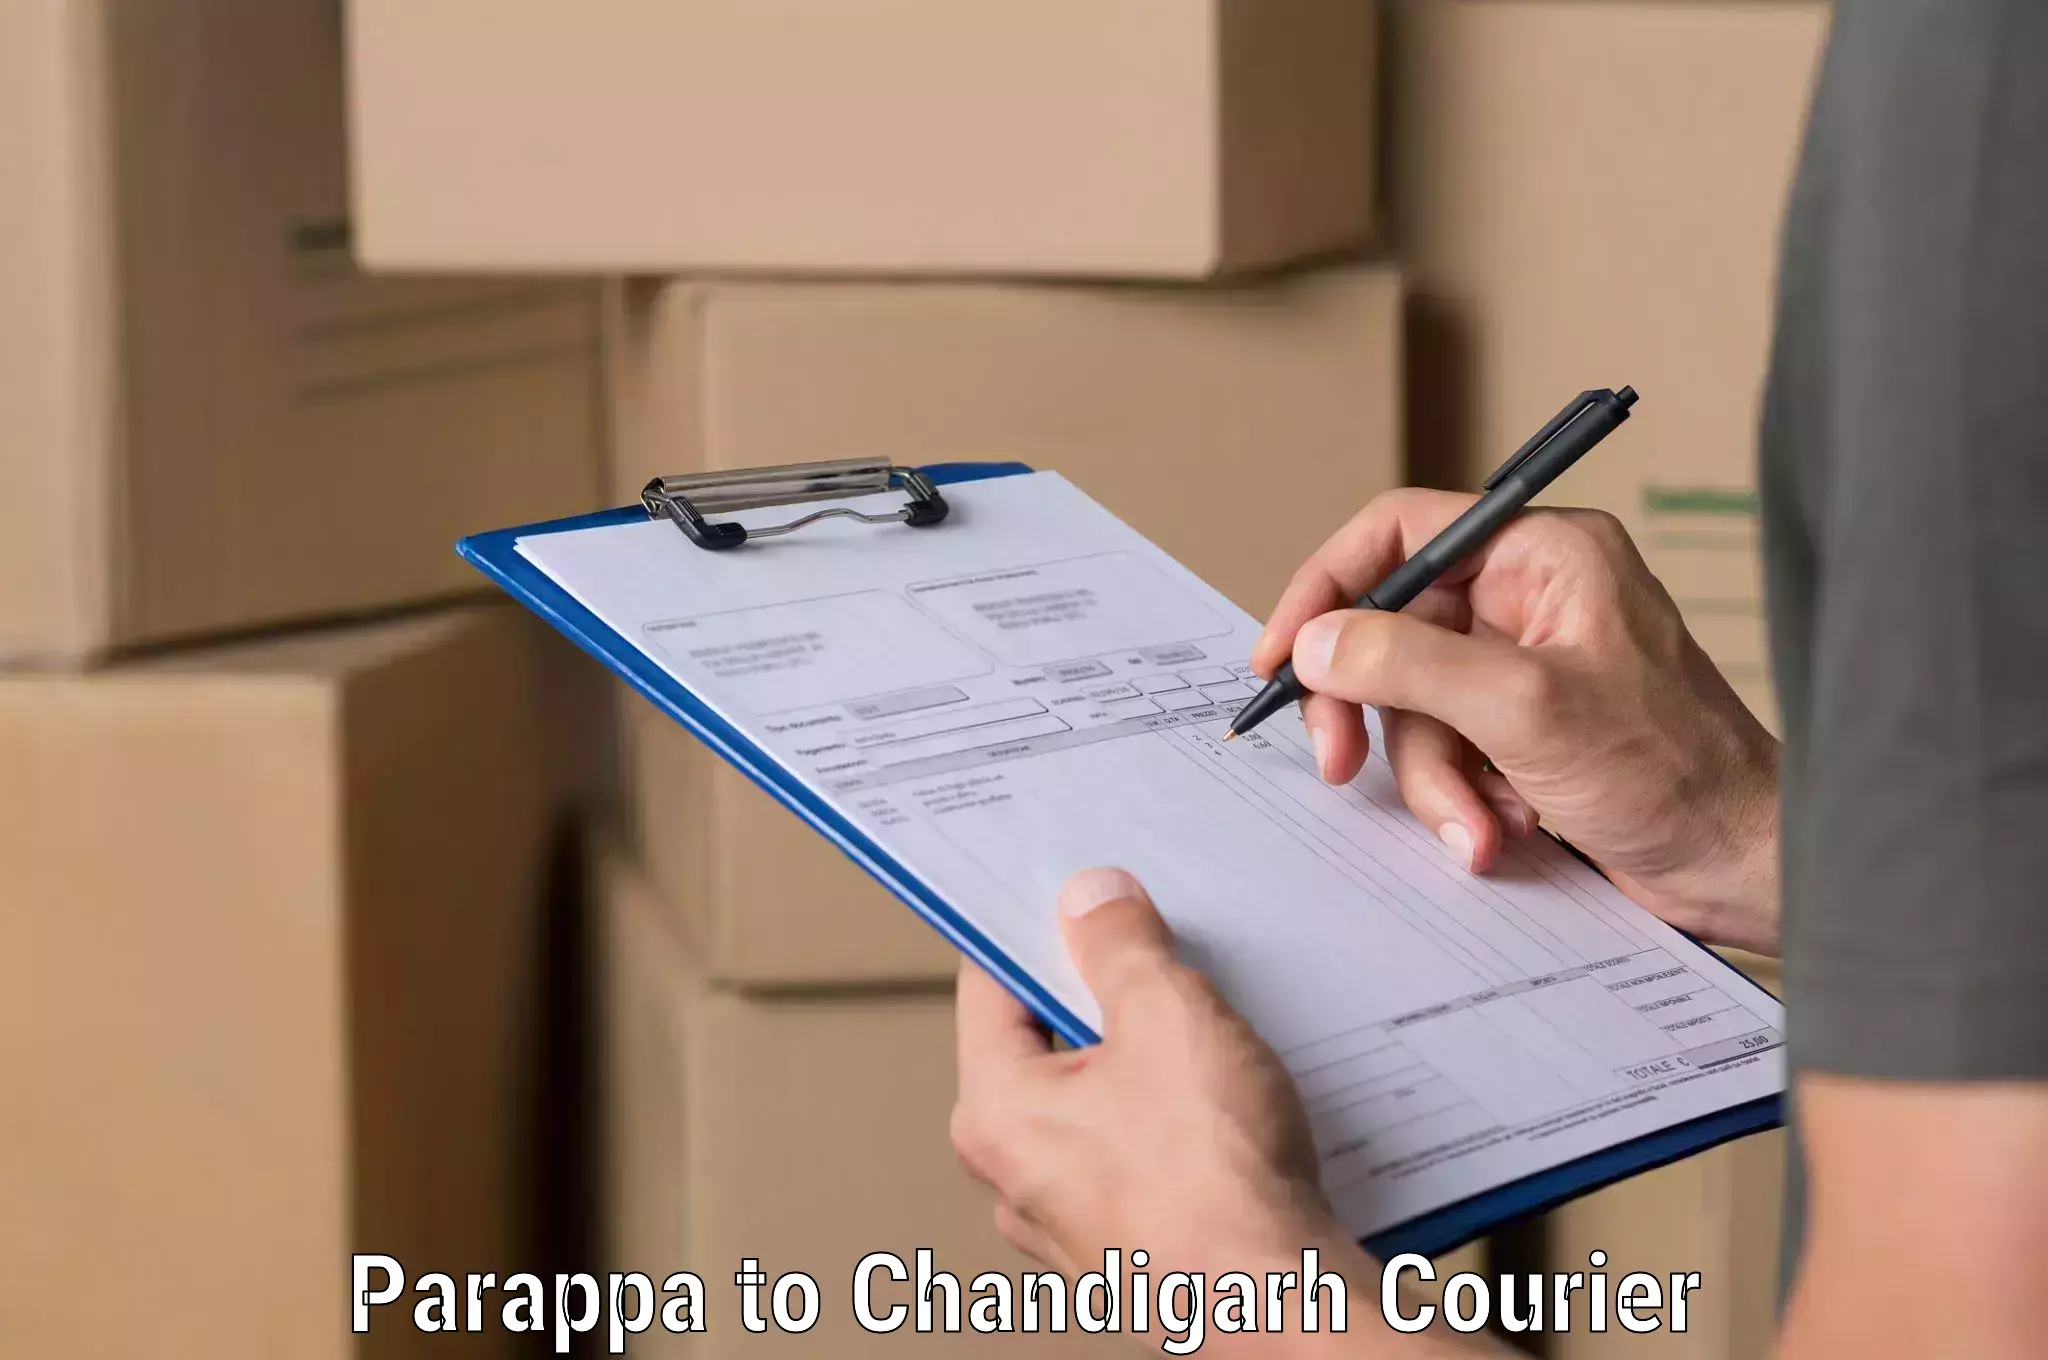 Same-day delivery solutions Parappa to Chandigarh